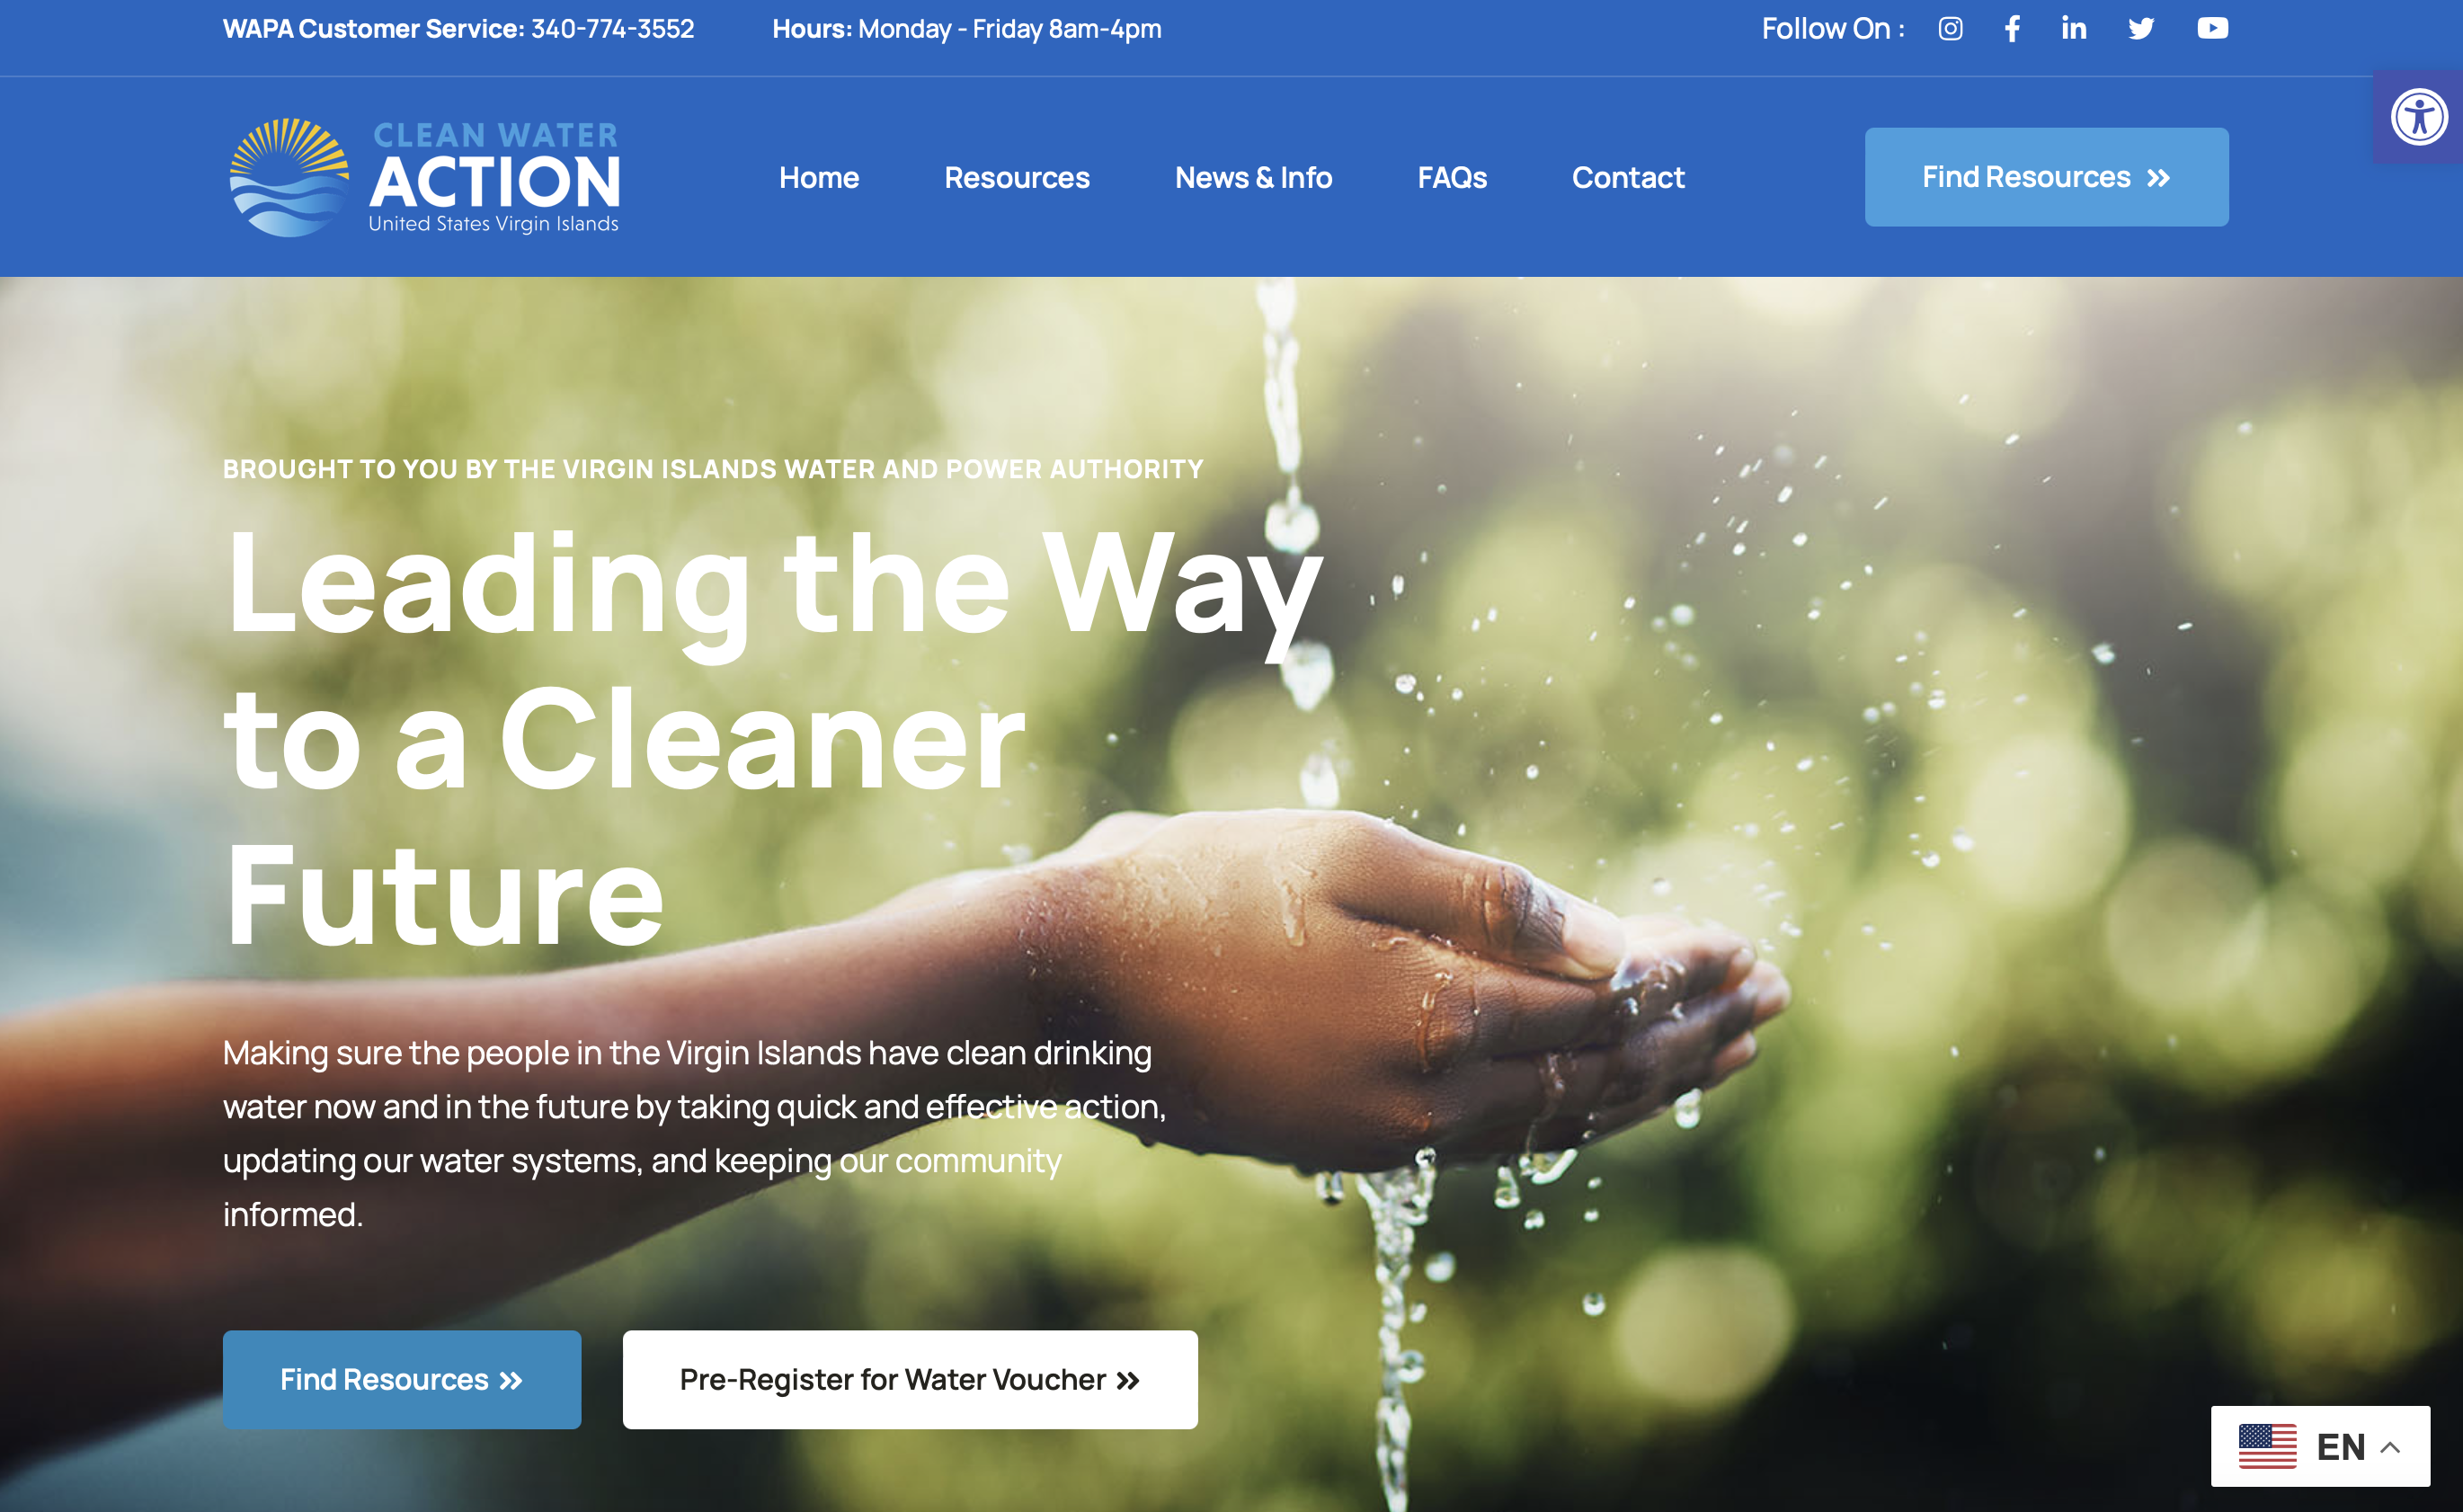 WAPA has established a “Clean Water Action” website, www.cleanwaterusvi.com, where St. Croix residents affected by lead in their water may register for $100 coupon books for bottled water that will be distributed starting Saturday. (Screenshot of website)